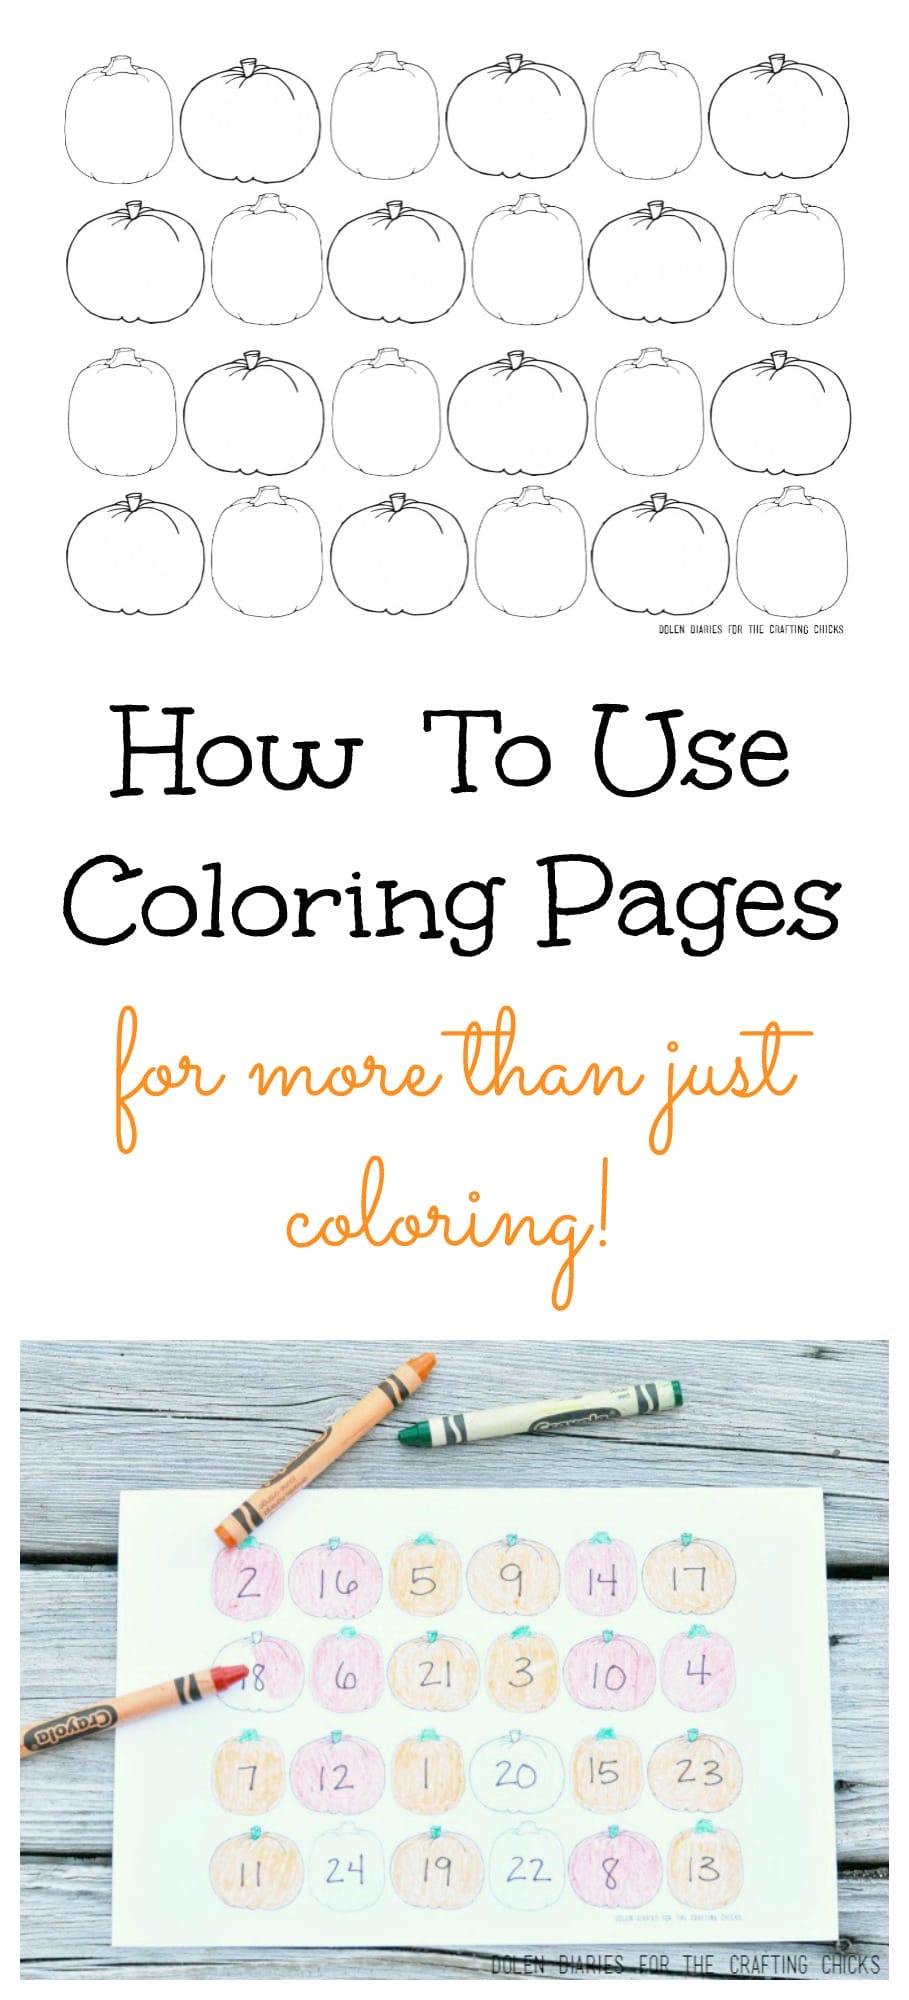 How To Use Coloring Pages For More Than Just Coloring